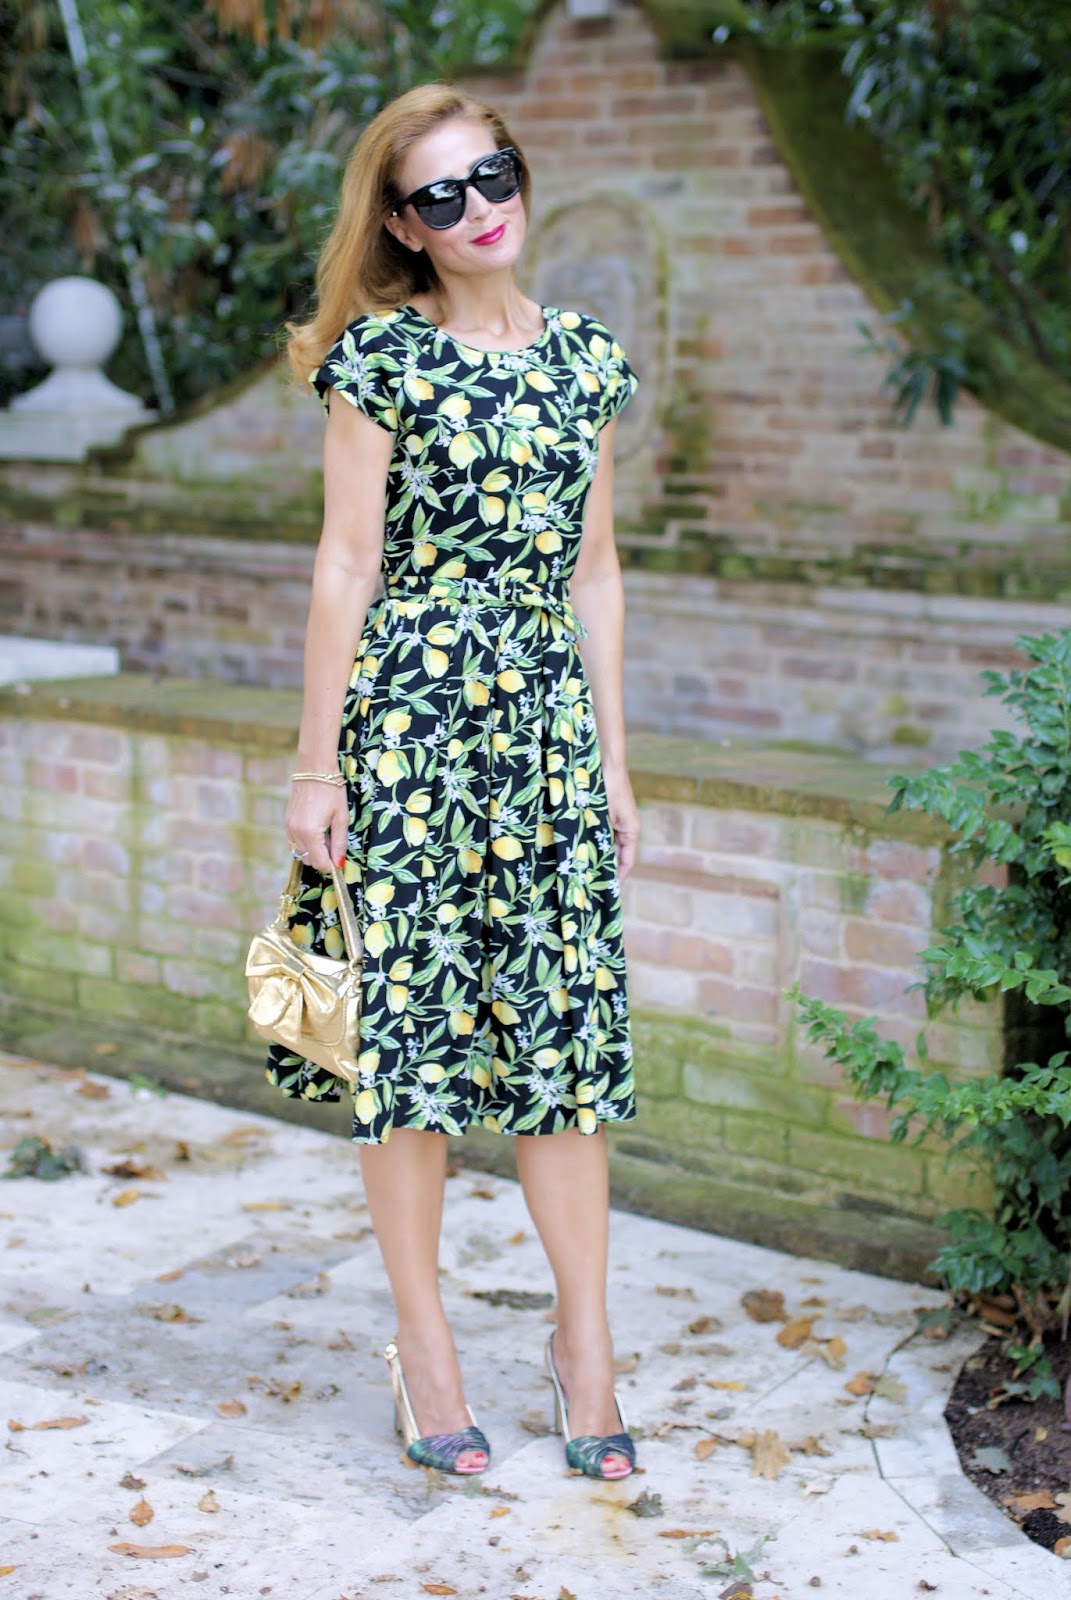 Lemon print dress for a ladylike outfit with Dolce & Gabbana style on Fashion and Cookies fashion blog, fashion blogger